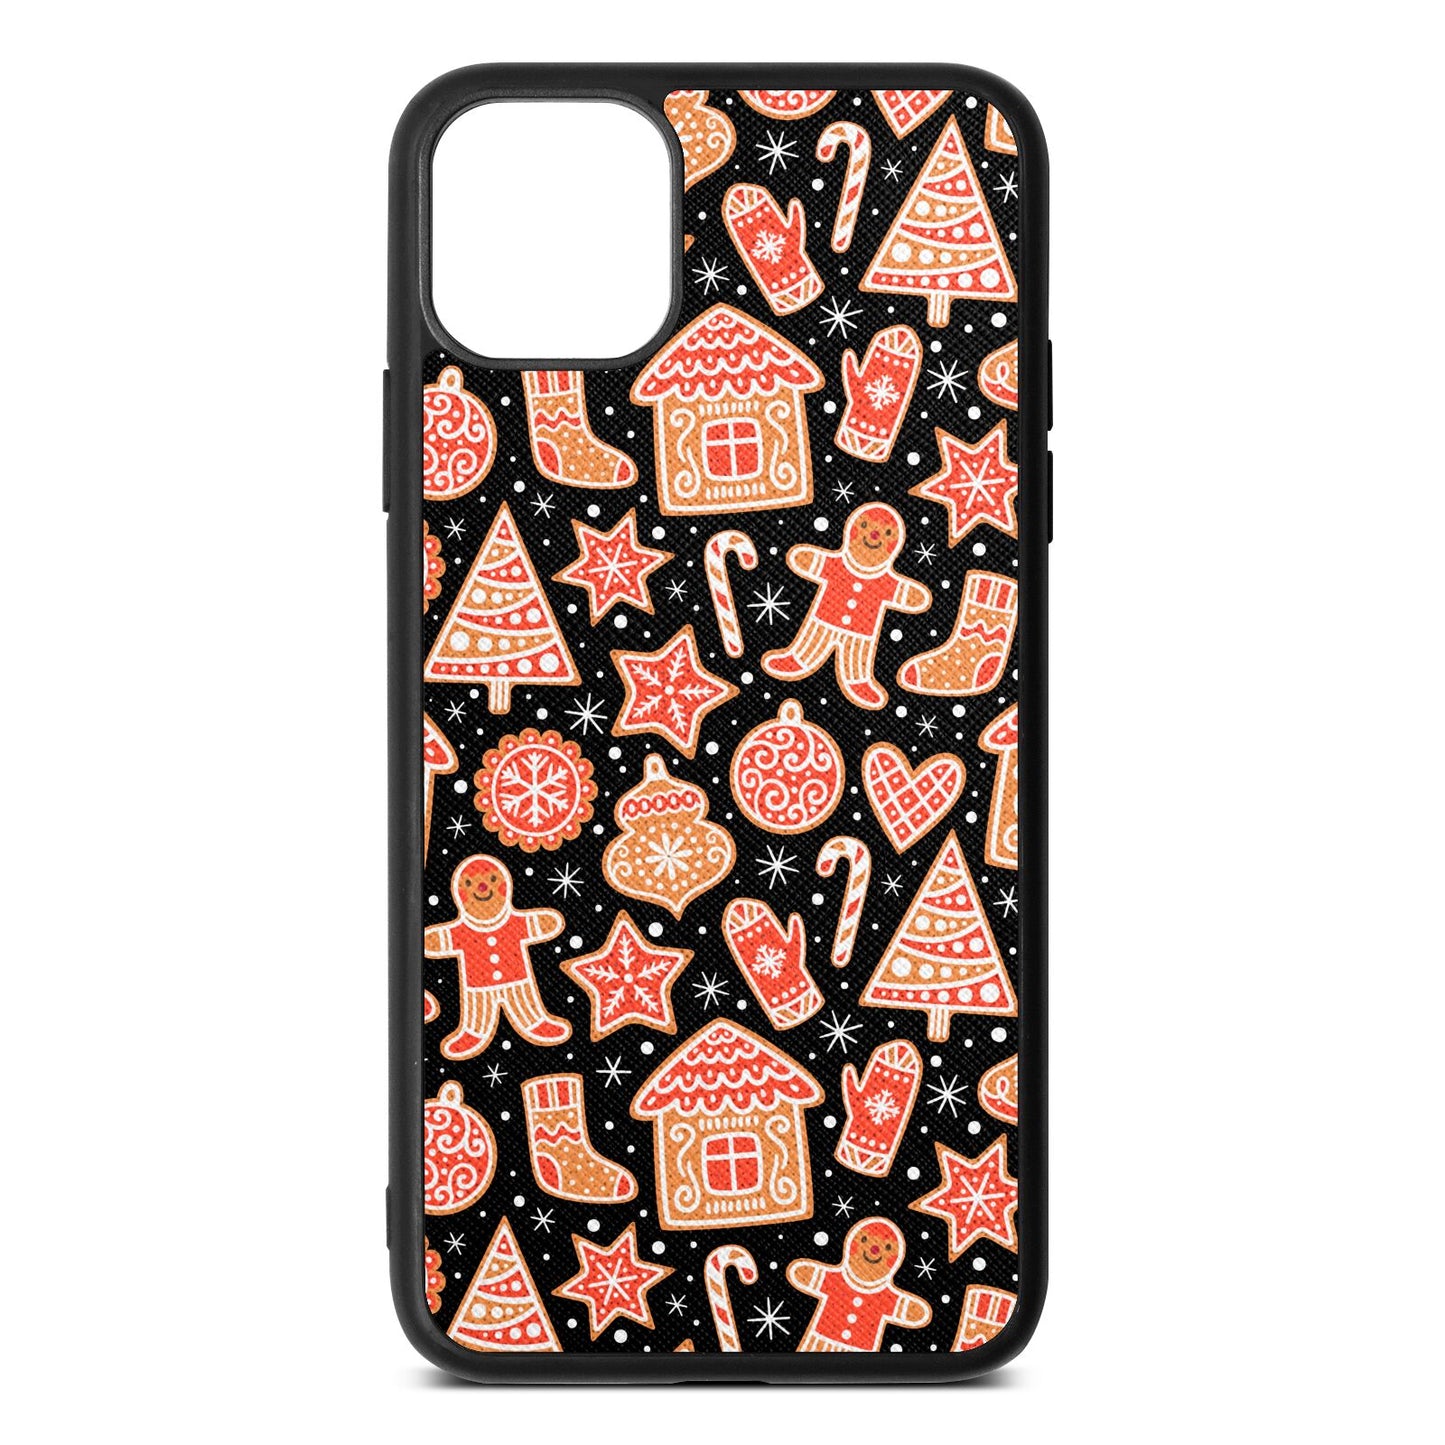 Christmas Gingerbread Black Saffiano Leather iPhone 11 Pro Max Case